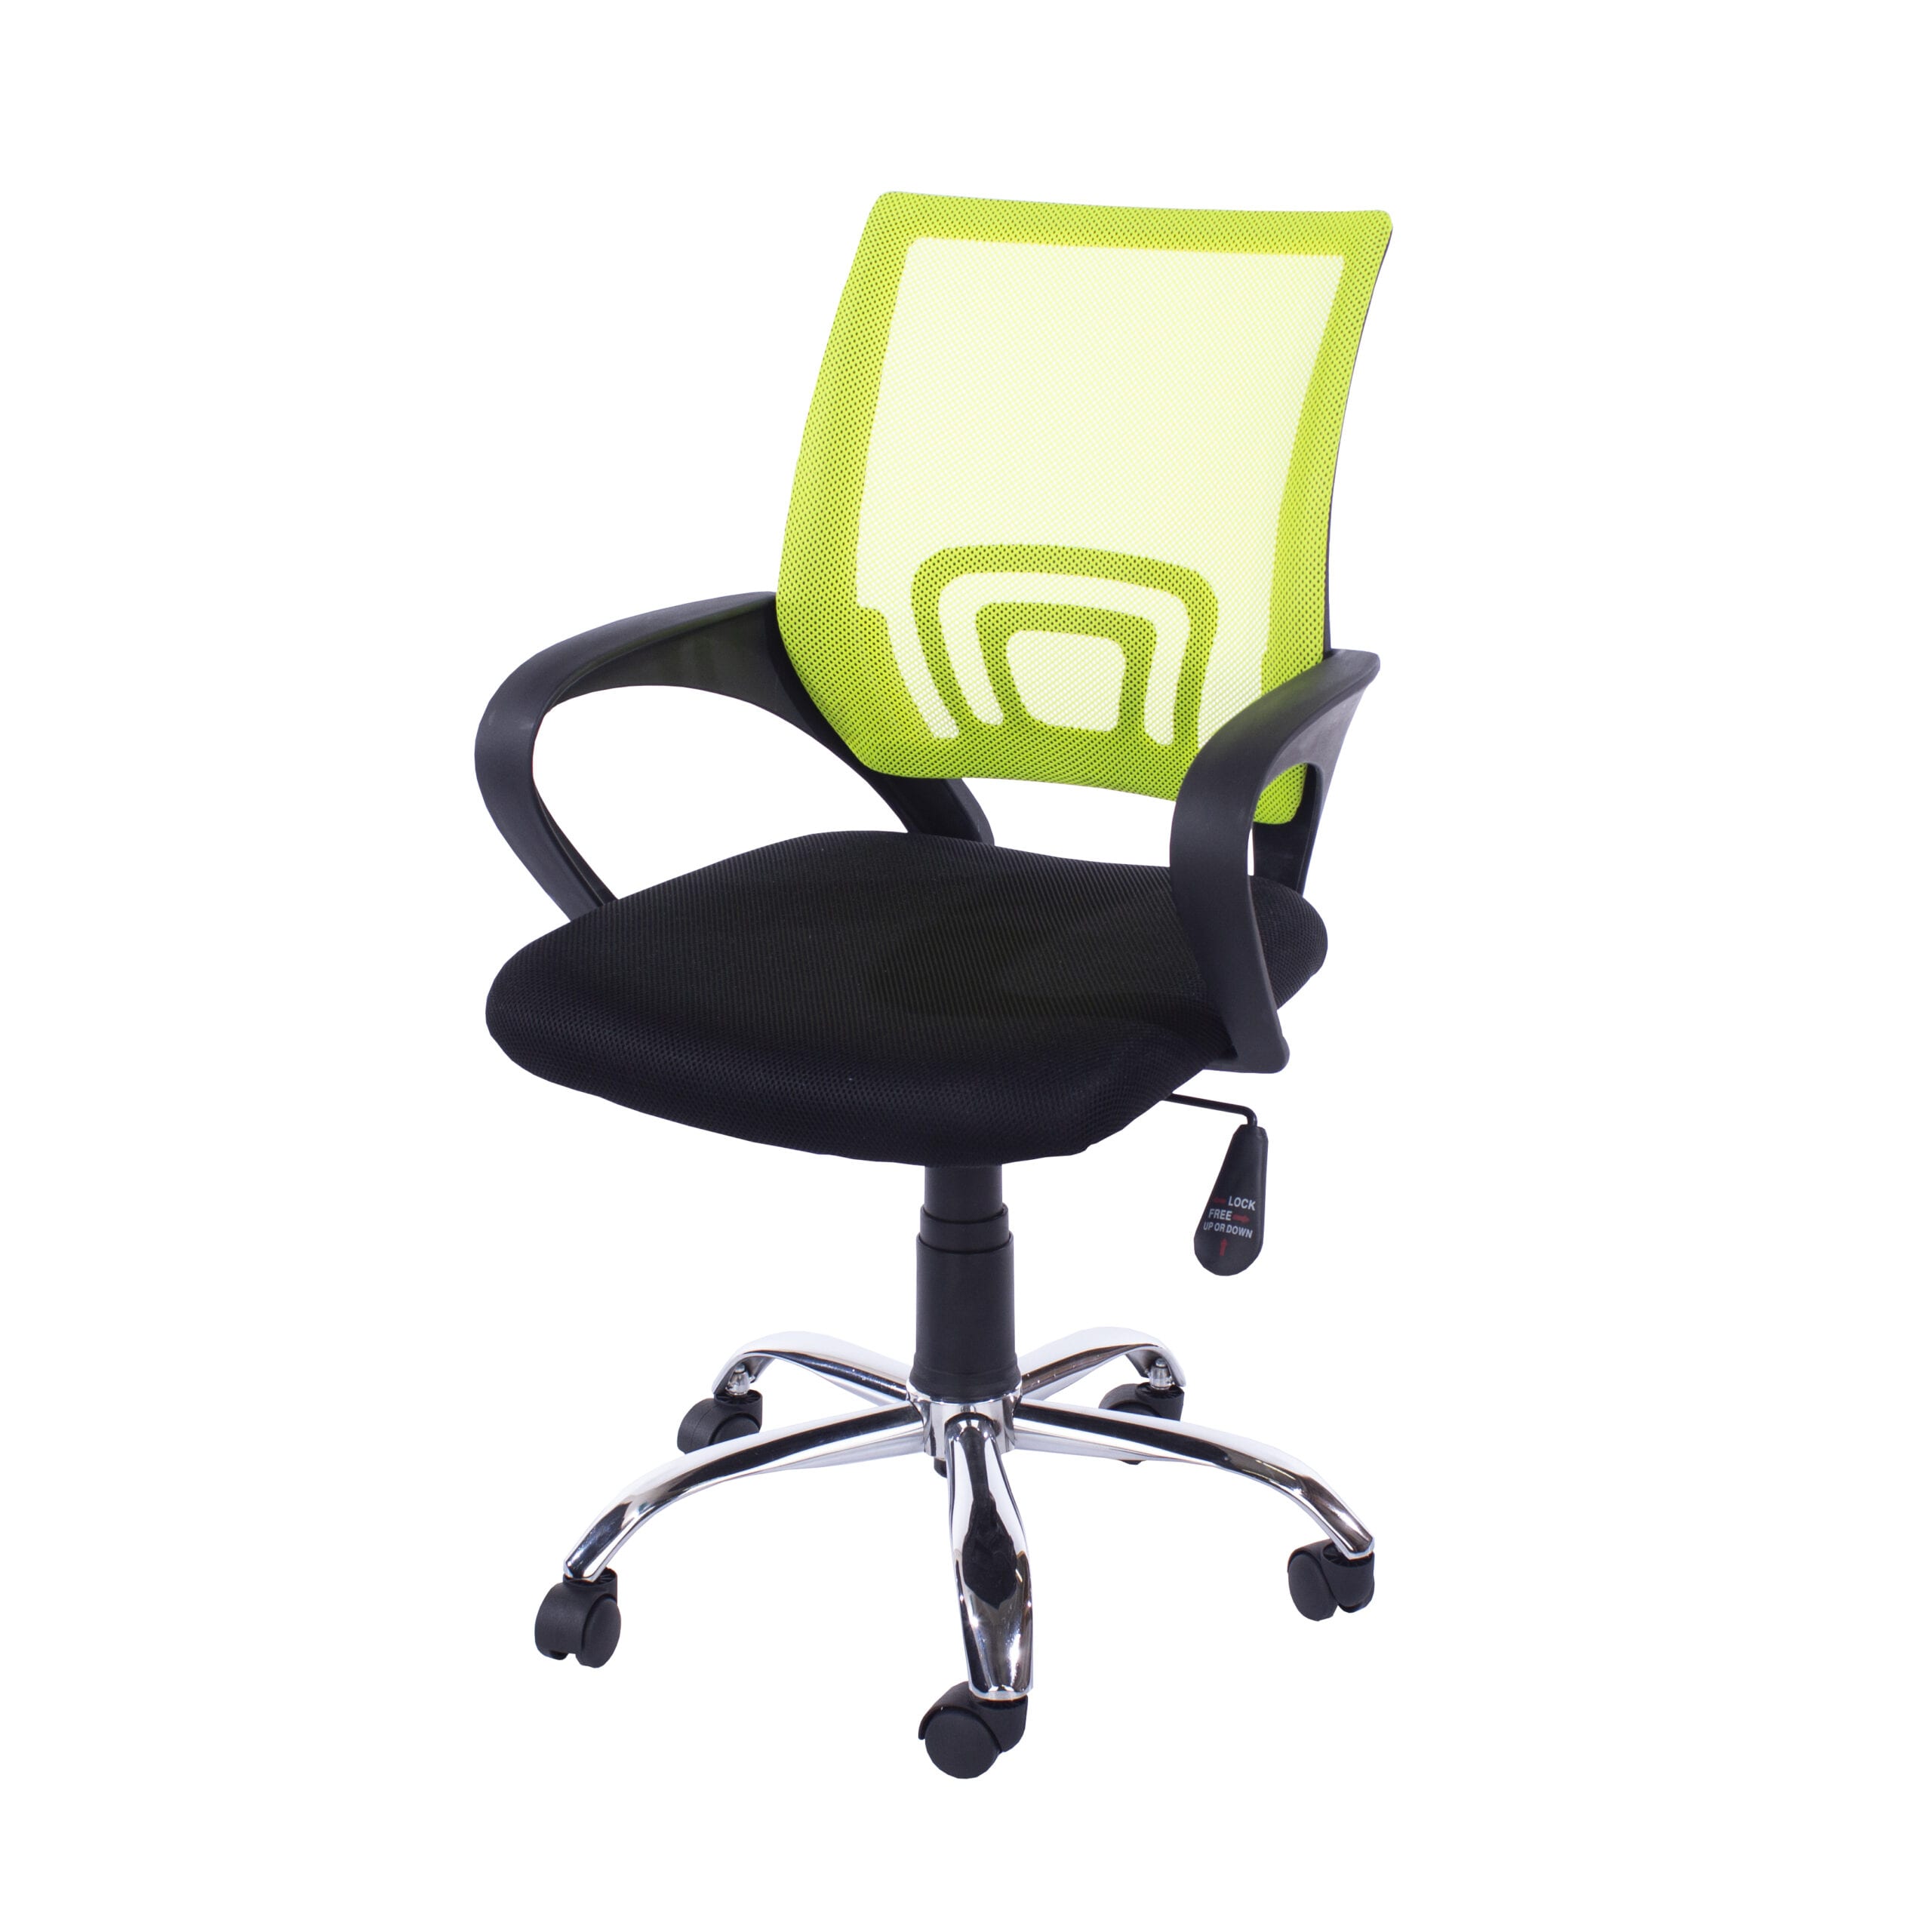 Lust study chair in lime green mesh black fabric & chrome base